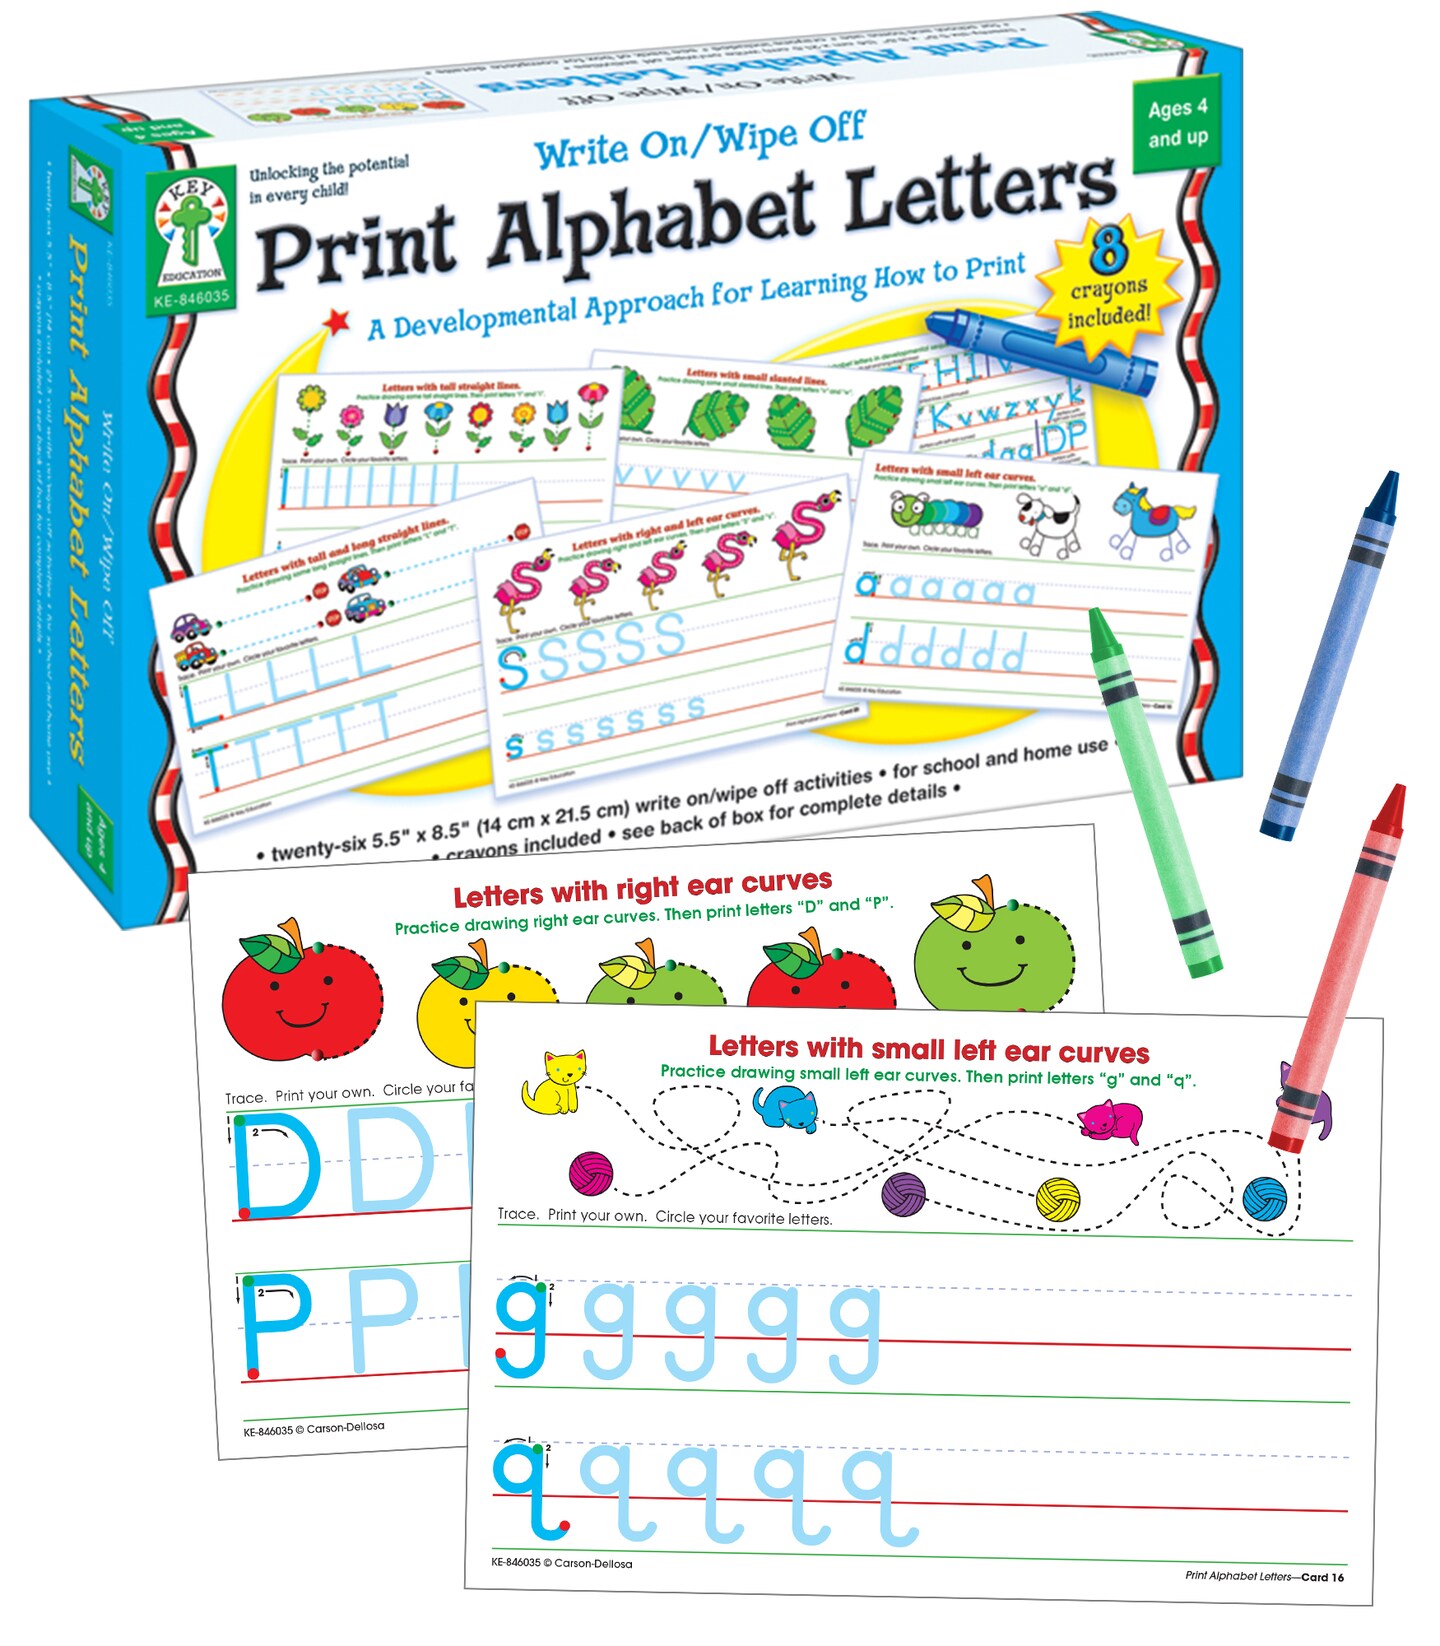 Key Education Write-On/Wipe-Off Print Alphabet Letters, Literacy Activities, Develop Handwriting and Fine Motor Skills, Teaches the Alphabet and Letter Sounds Ages 5+ (21 pc)